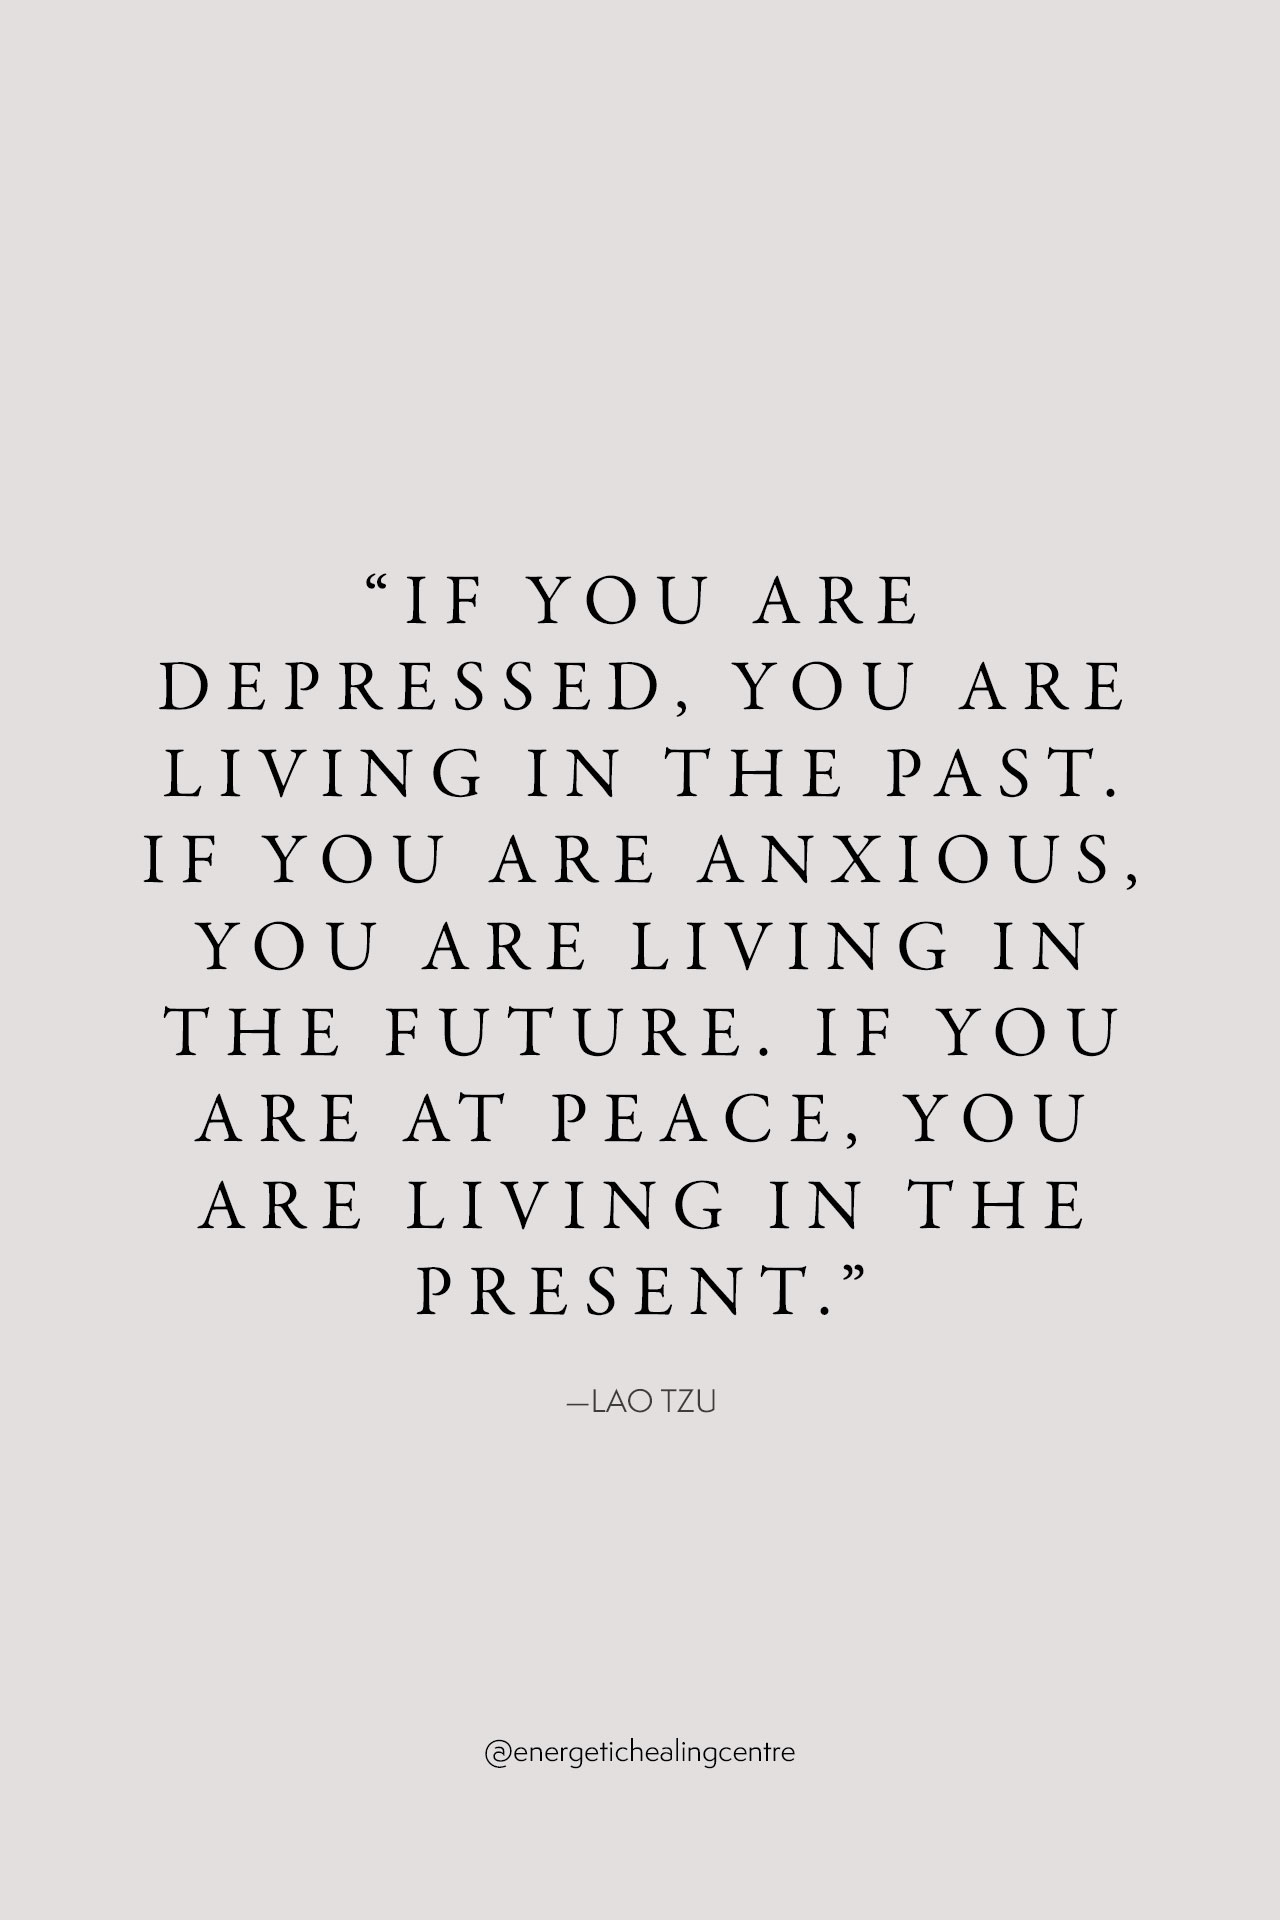 Quote on how to be more present